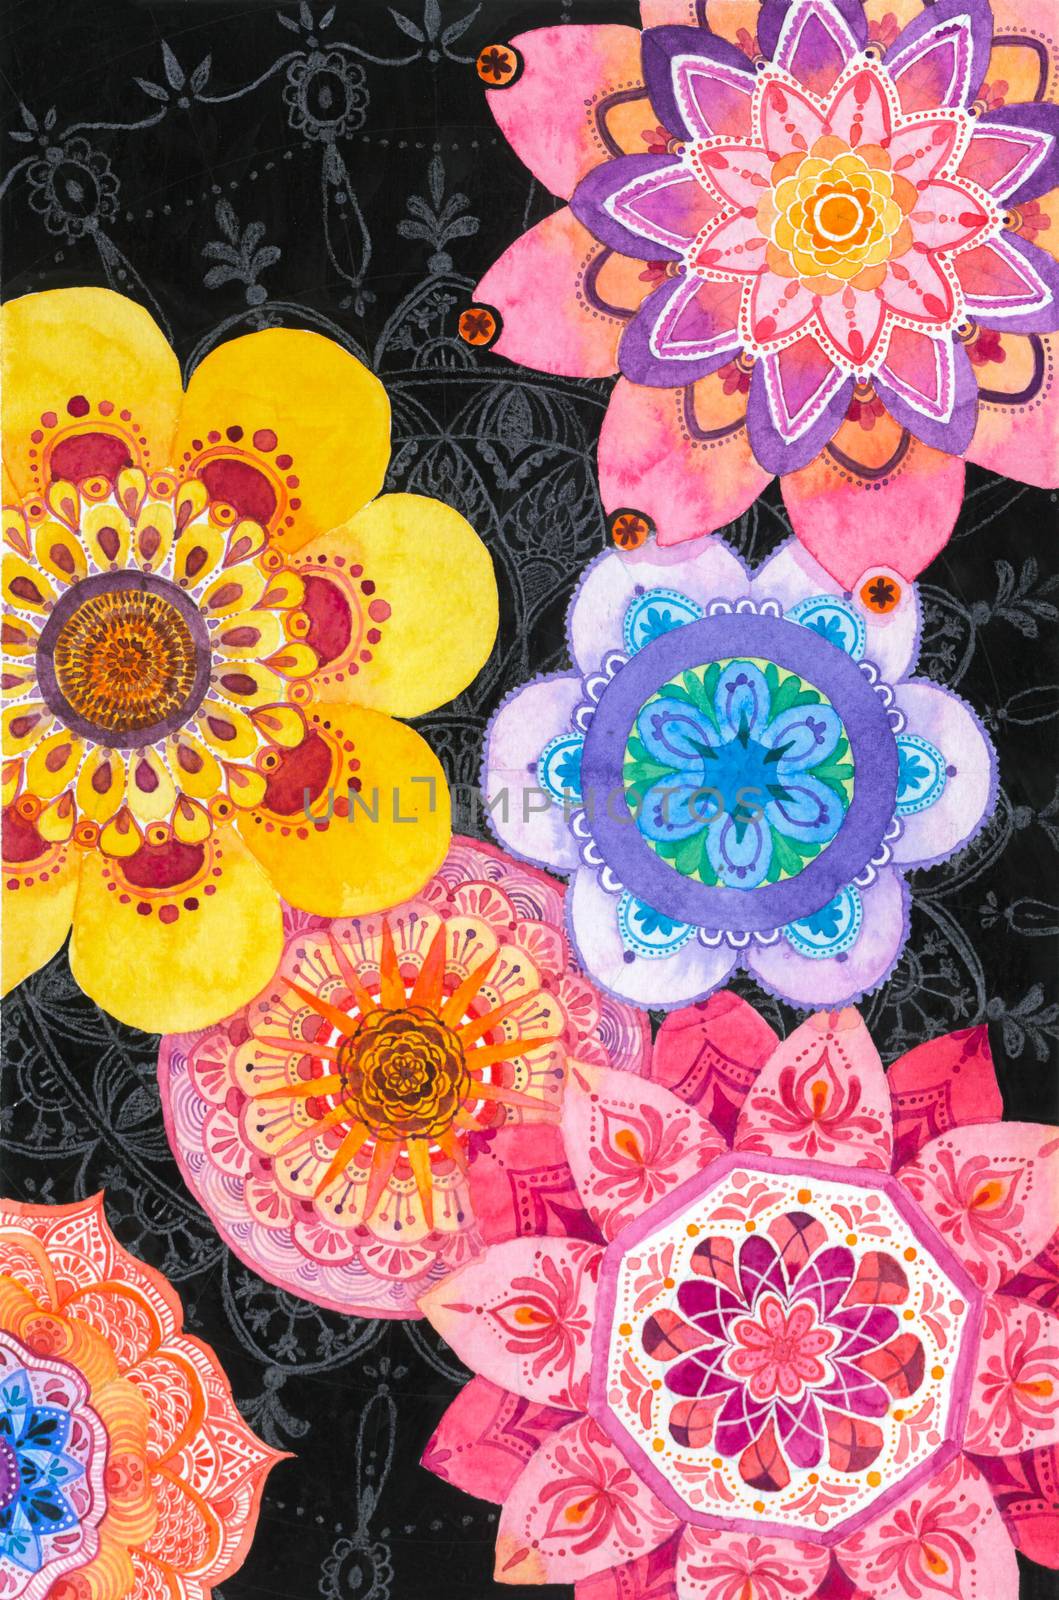 colorful mandala texture background, watercolor hand painting, colored pencil technique on black background by Ungamrung